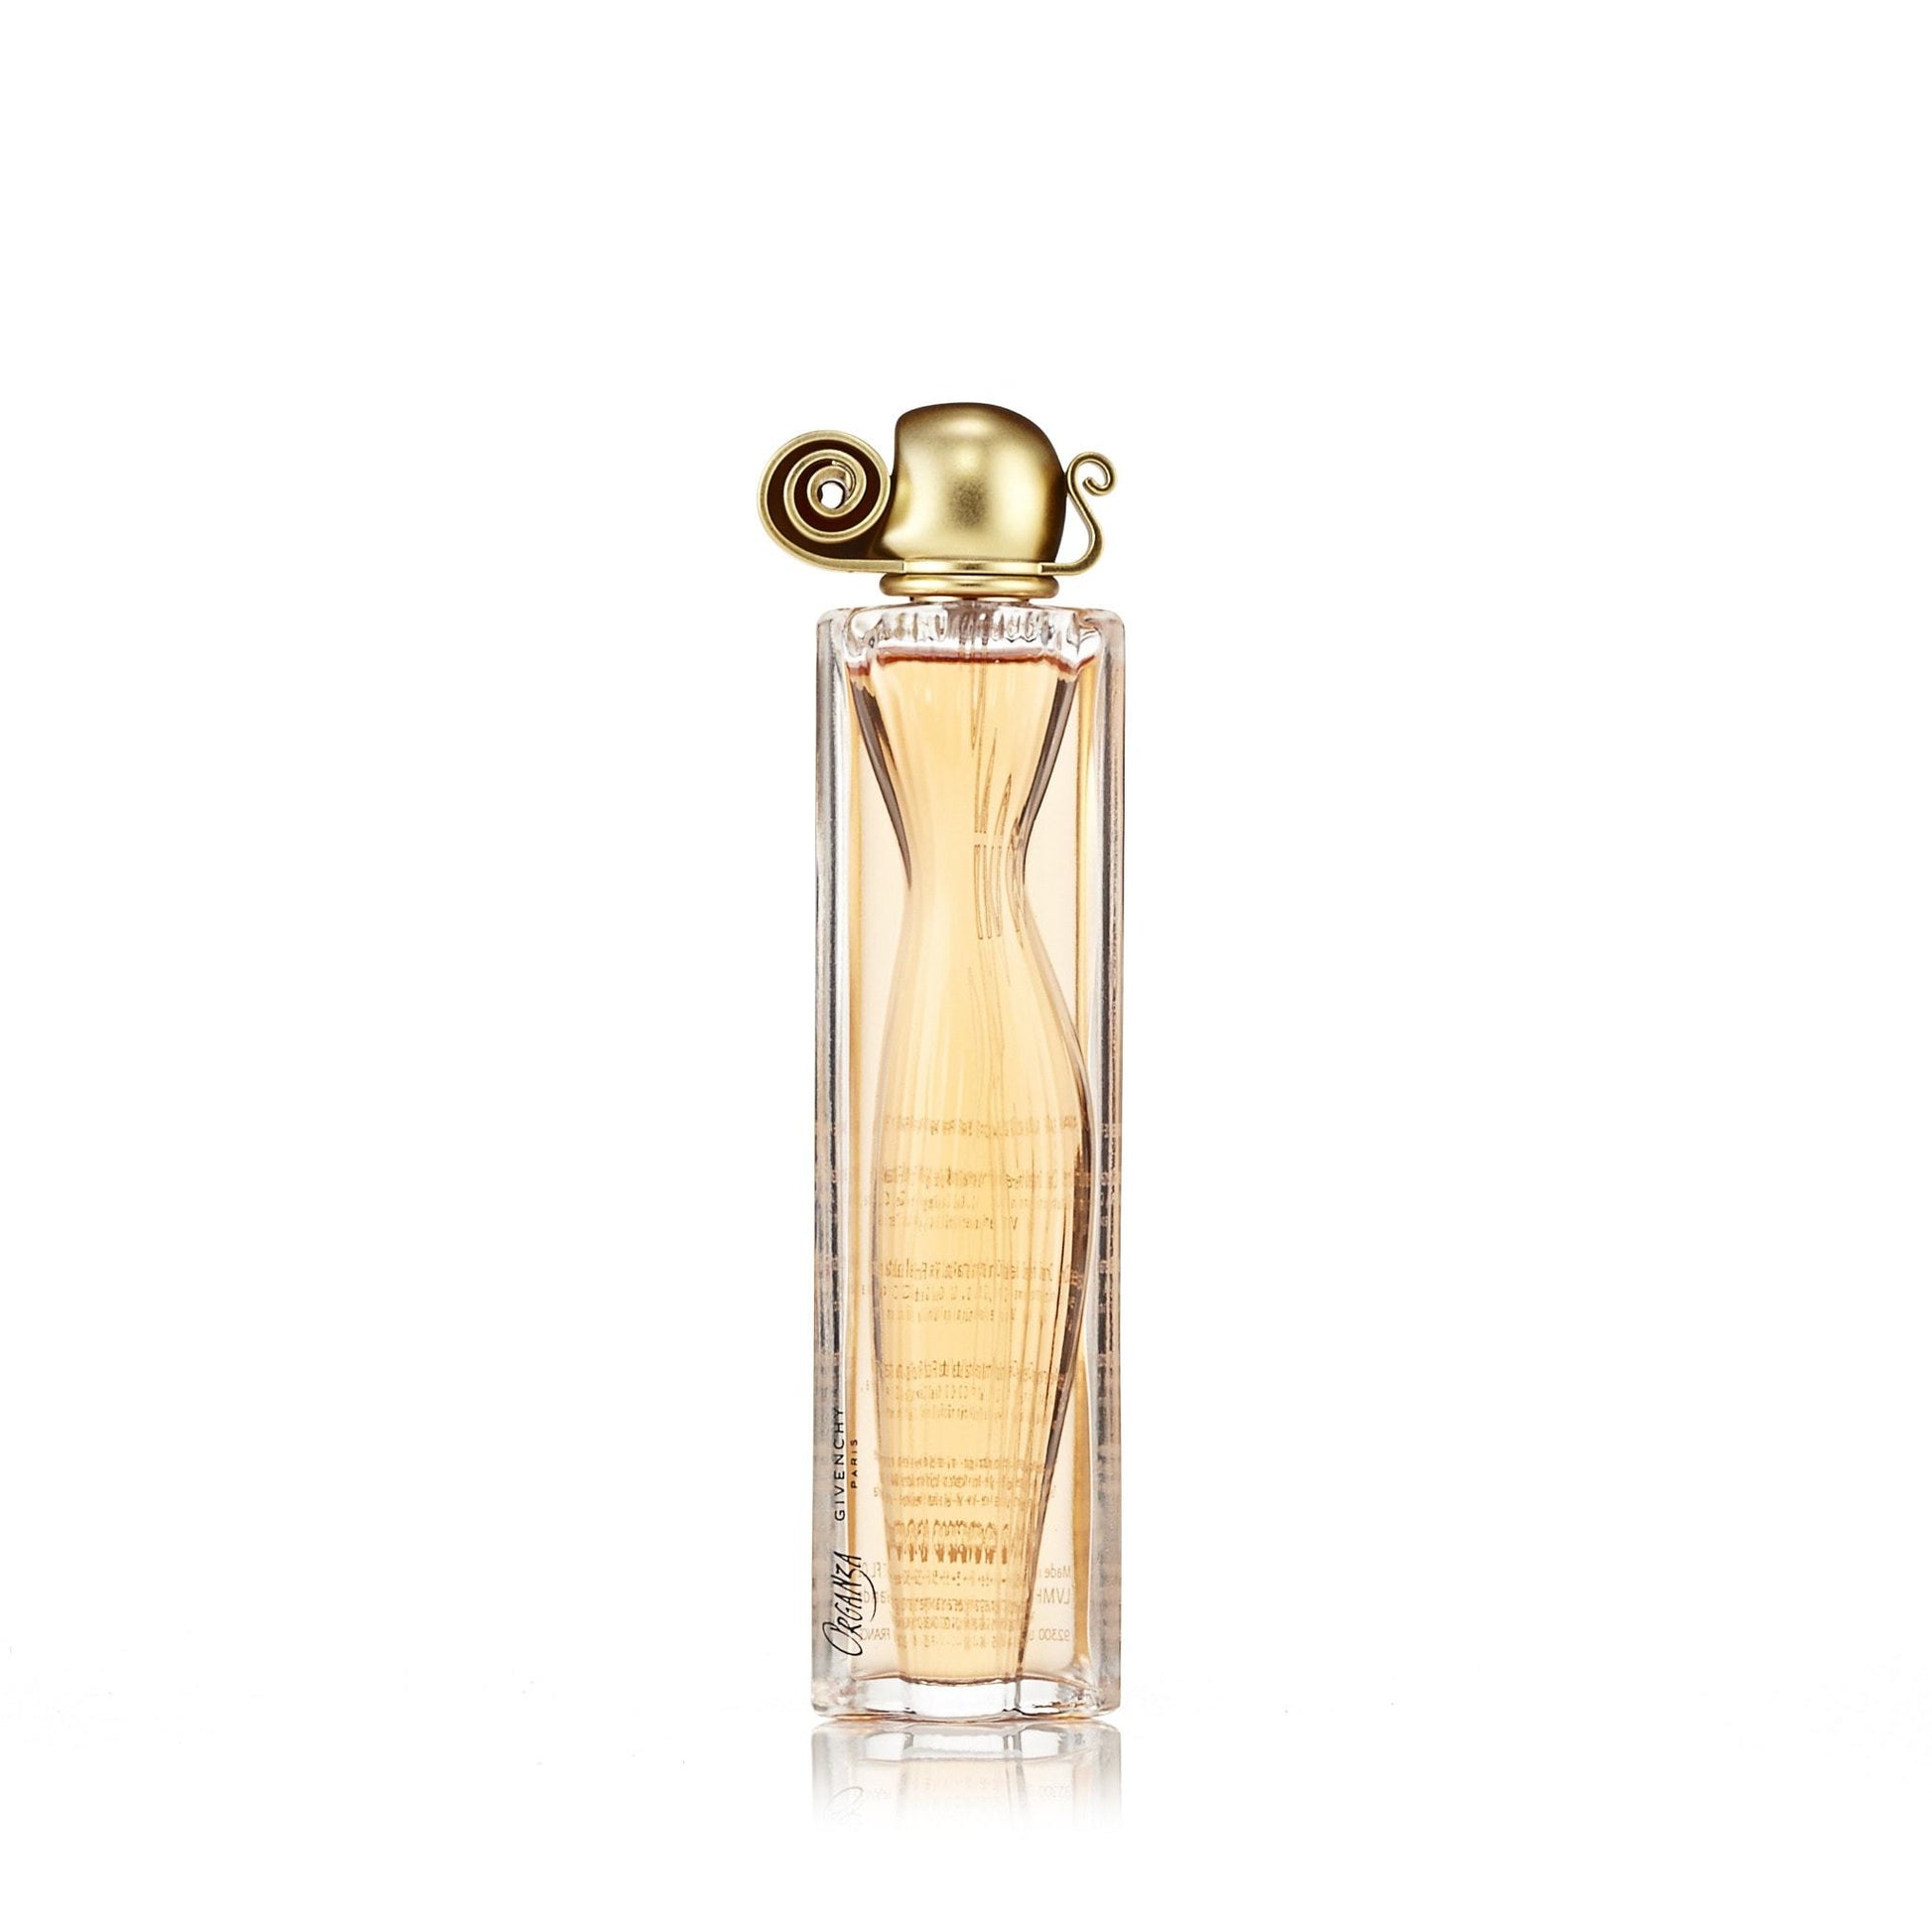 Organza Eau de Parfum Spray for Women by Givenchy, Product image 3